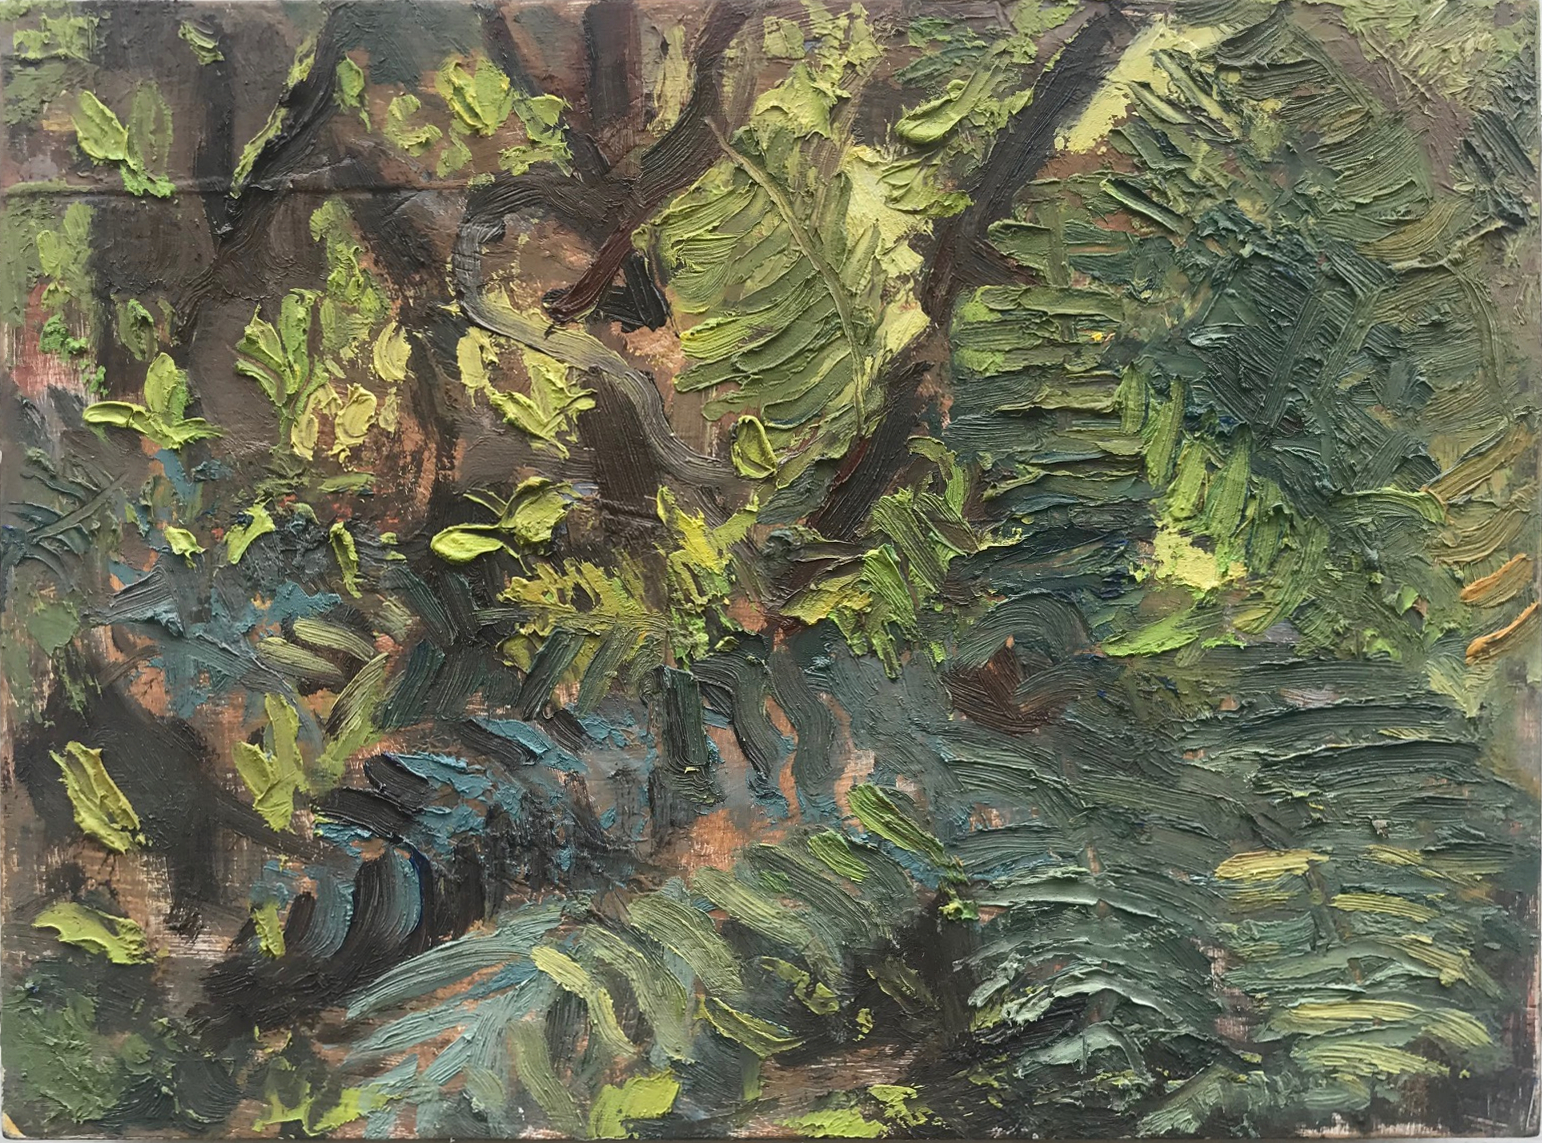 First Day of Spring, oil on panel, 8.75" x 12", 2018